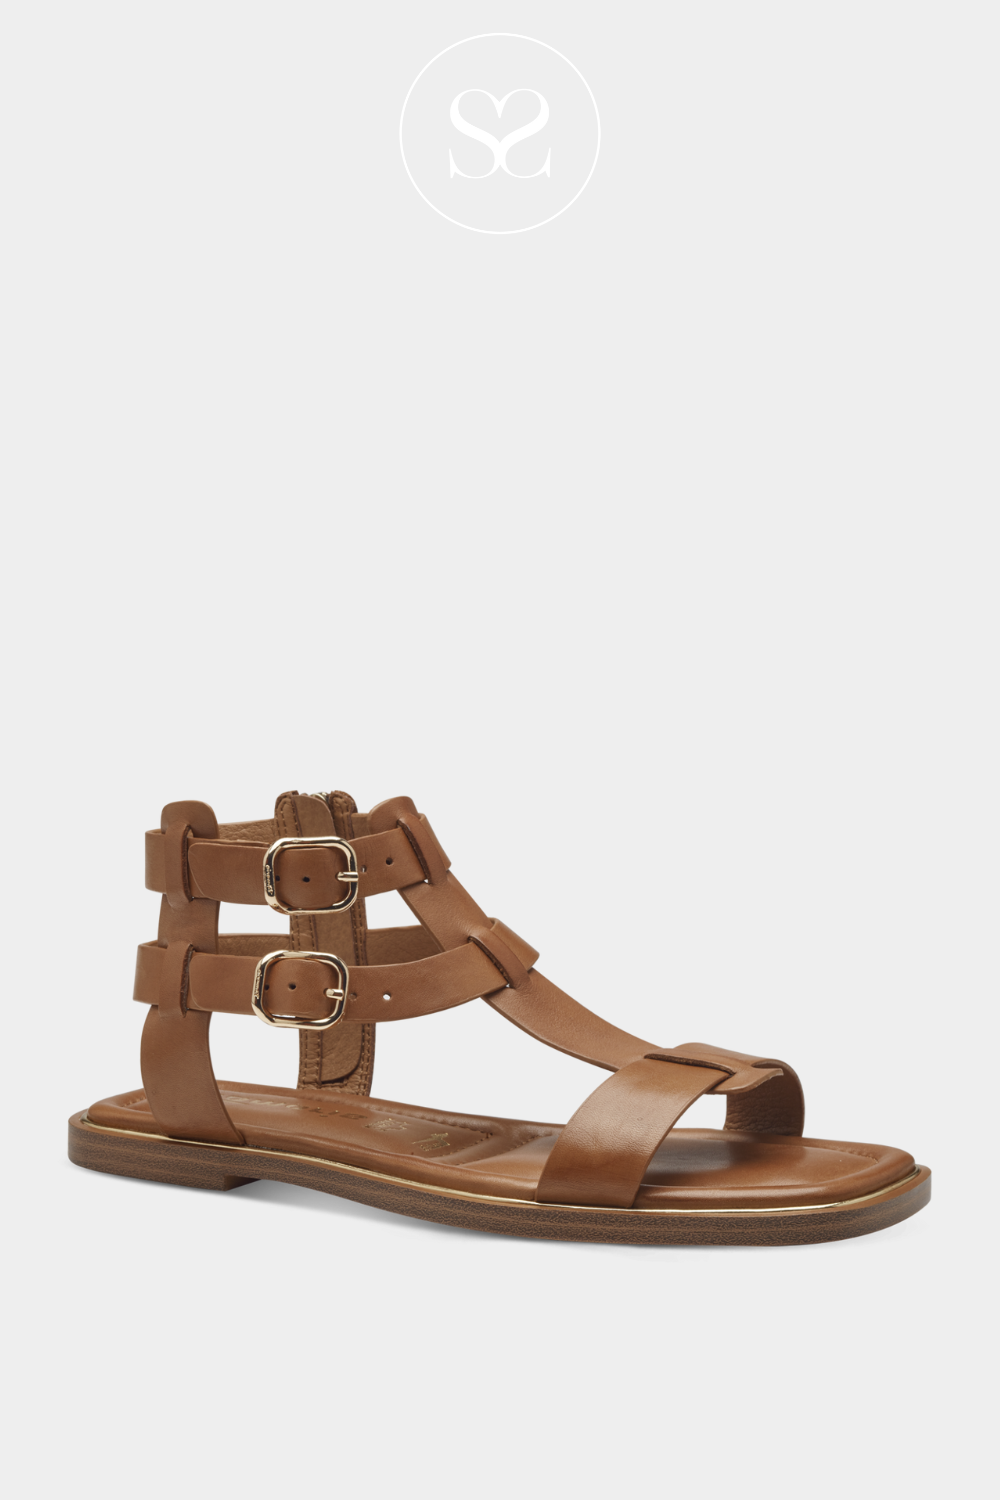 TAMARIS 1-28118-42 TAN LEATHER GLADIATOR FLAT SANDALS WITH DOUBLE ADJUSTABLE ANKLE STRAP